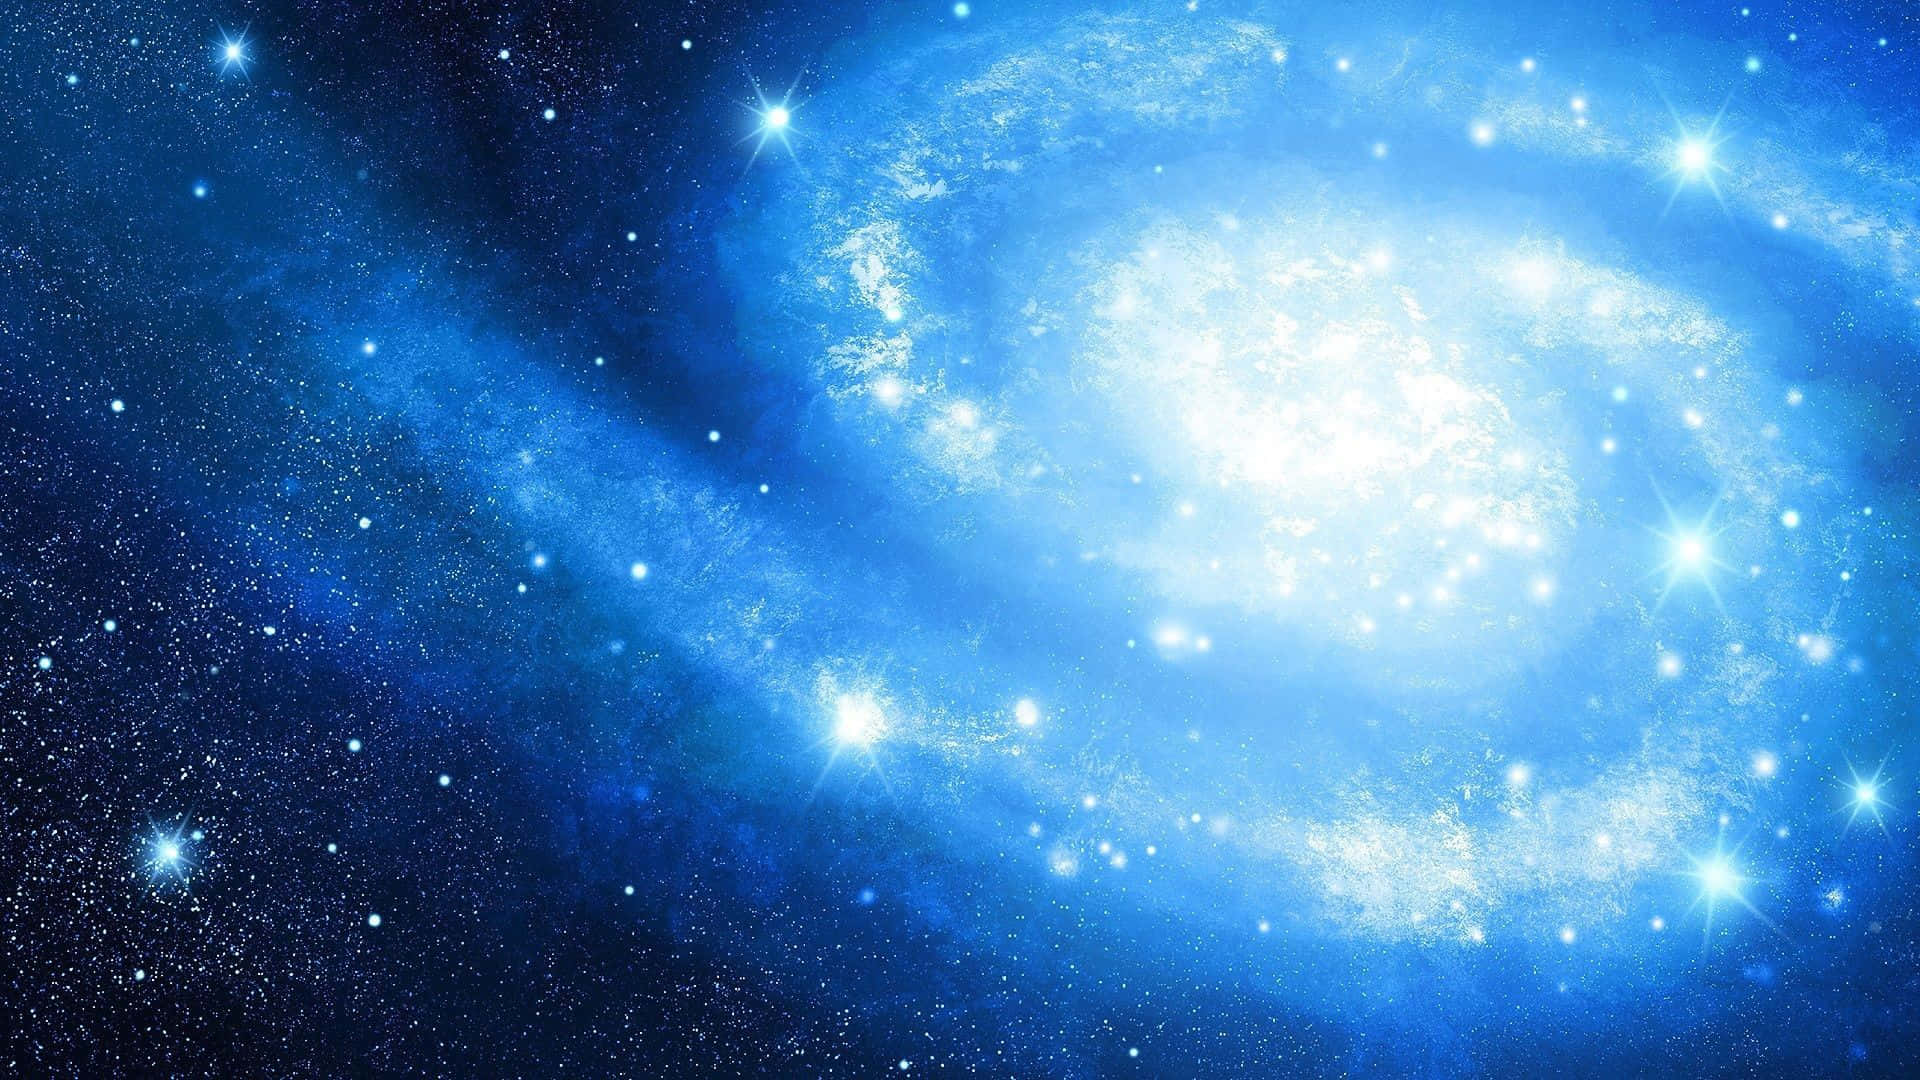 Take a Journey Through the Vastness of the Universe